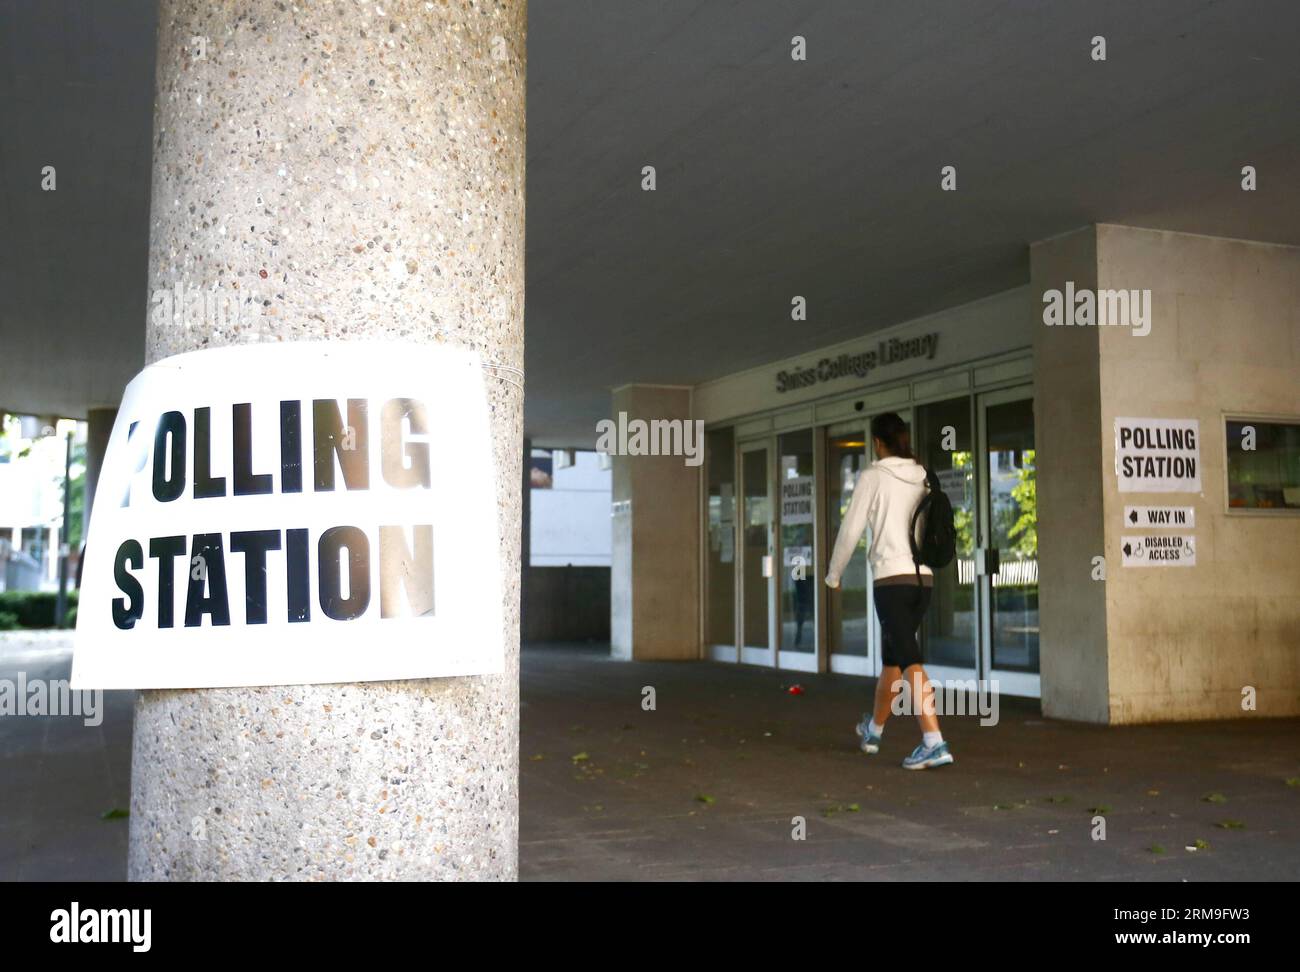 (140522) -- LONDON, May 22, 2014 (Xinhu a) -- A resident walks past a polling station in London, Britain, May 22, 2014. European parliamentary elections kicked off on Thursday. (Xinhua/Yin Gang) BRITAIN-LONDON-EUROPEAN PARLIAMENT ELECTIONS PUBLICATIONxNOTxINxCHN   London May 22 2014 Xinhu a a Resident Walks Past a Polling Station in London Britain May 22 2014 European Parliamentary Elections kicked off ON Thursday XINHUA Yin Monitoring Britain London European Parliament Elections PUBLICATIONxNOTxINxCHN Stock Photo